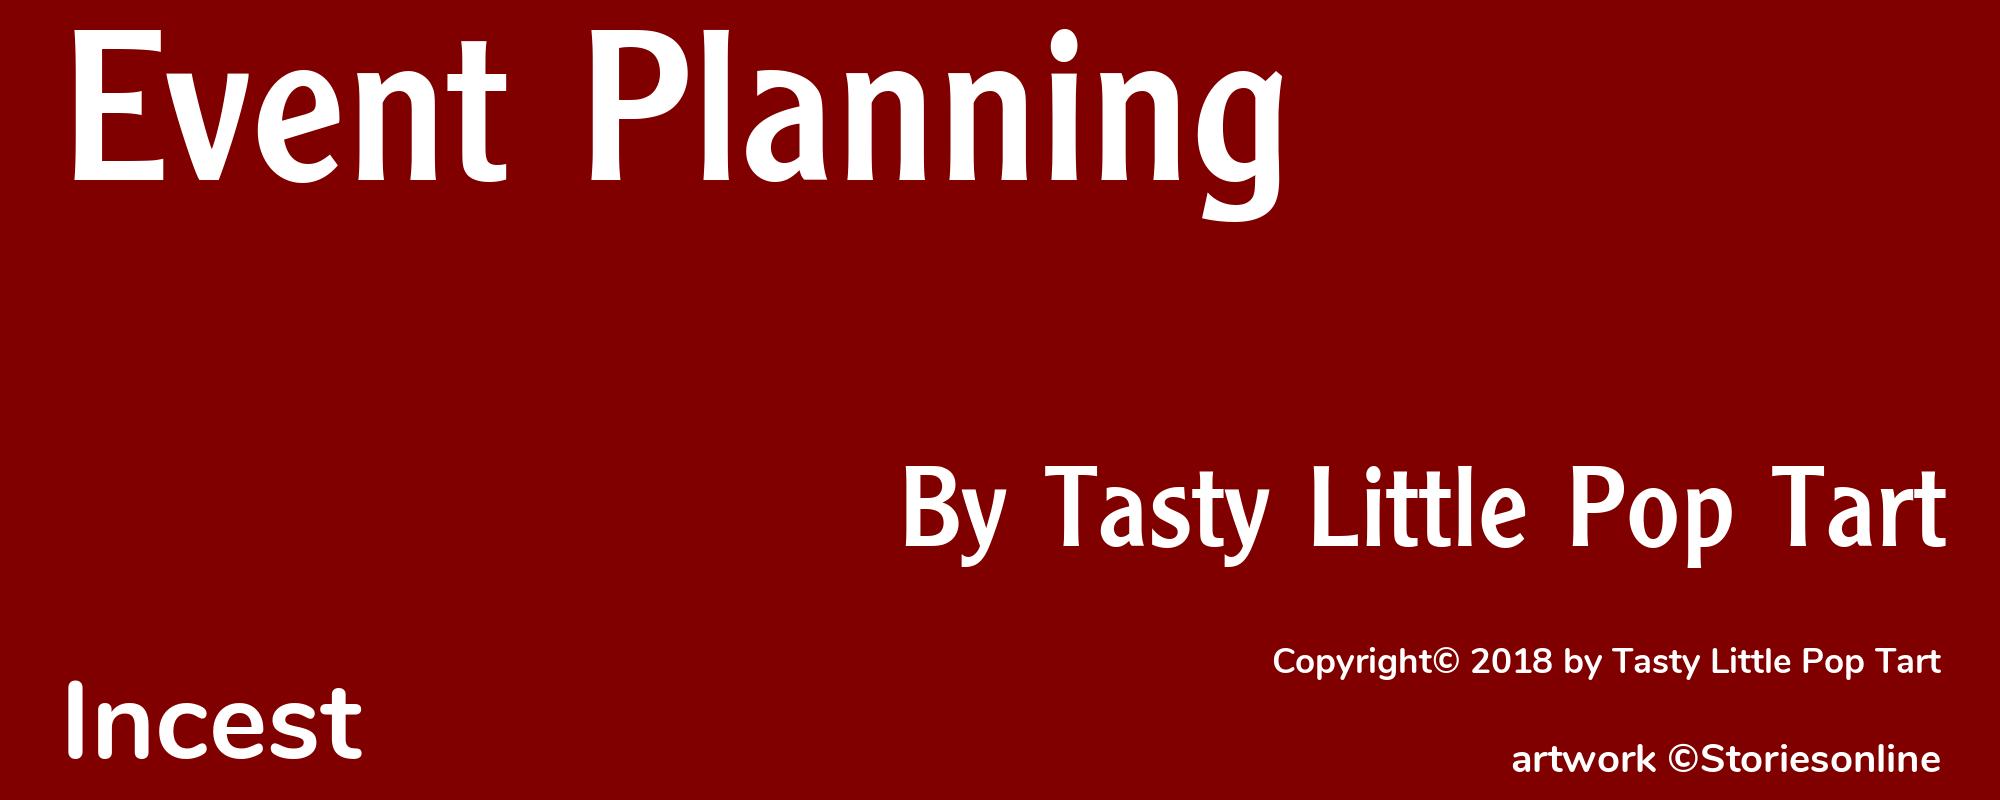 Event Planning - Cover